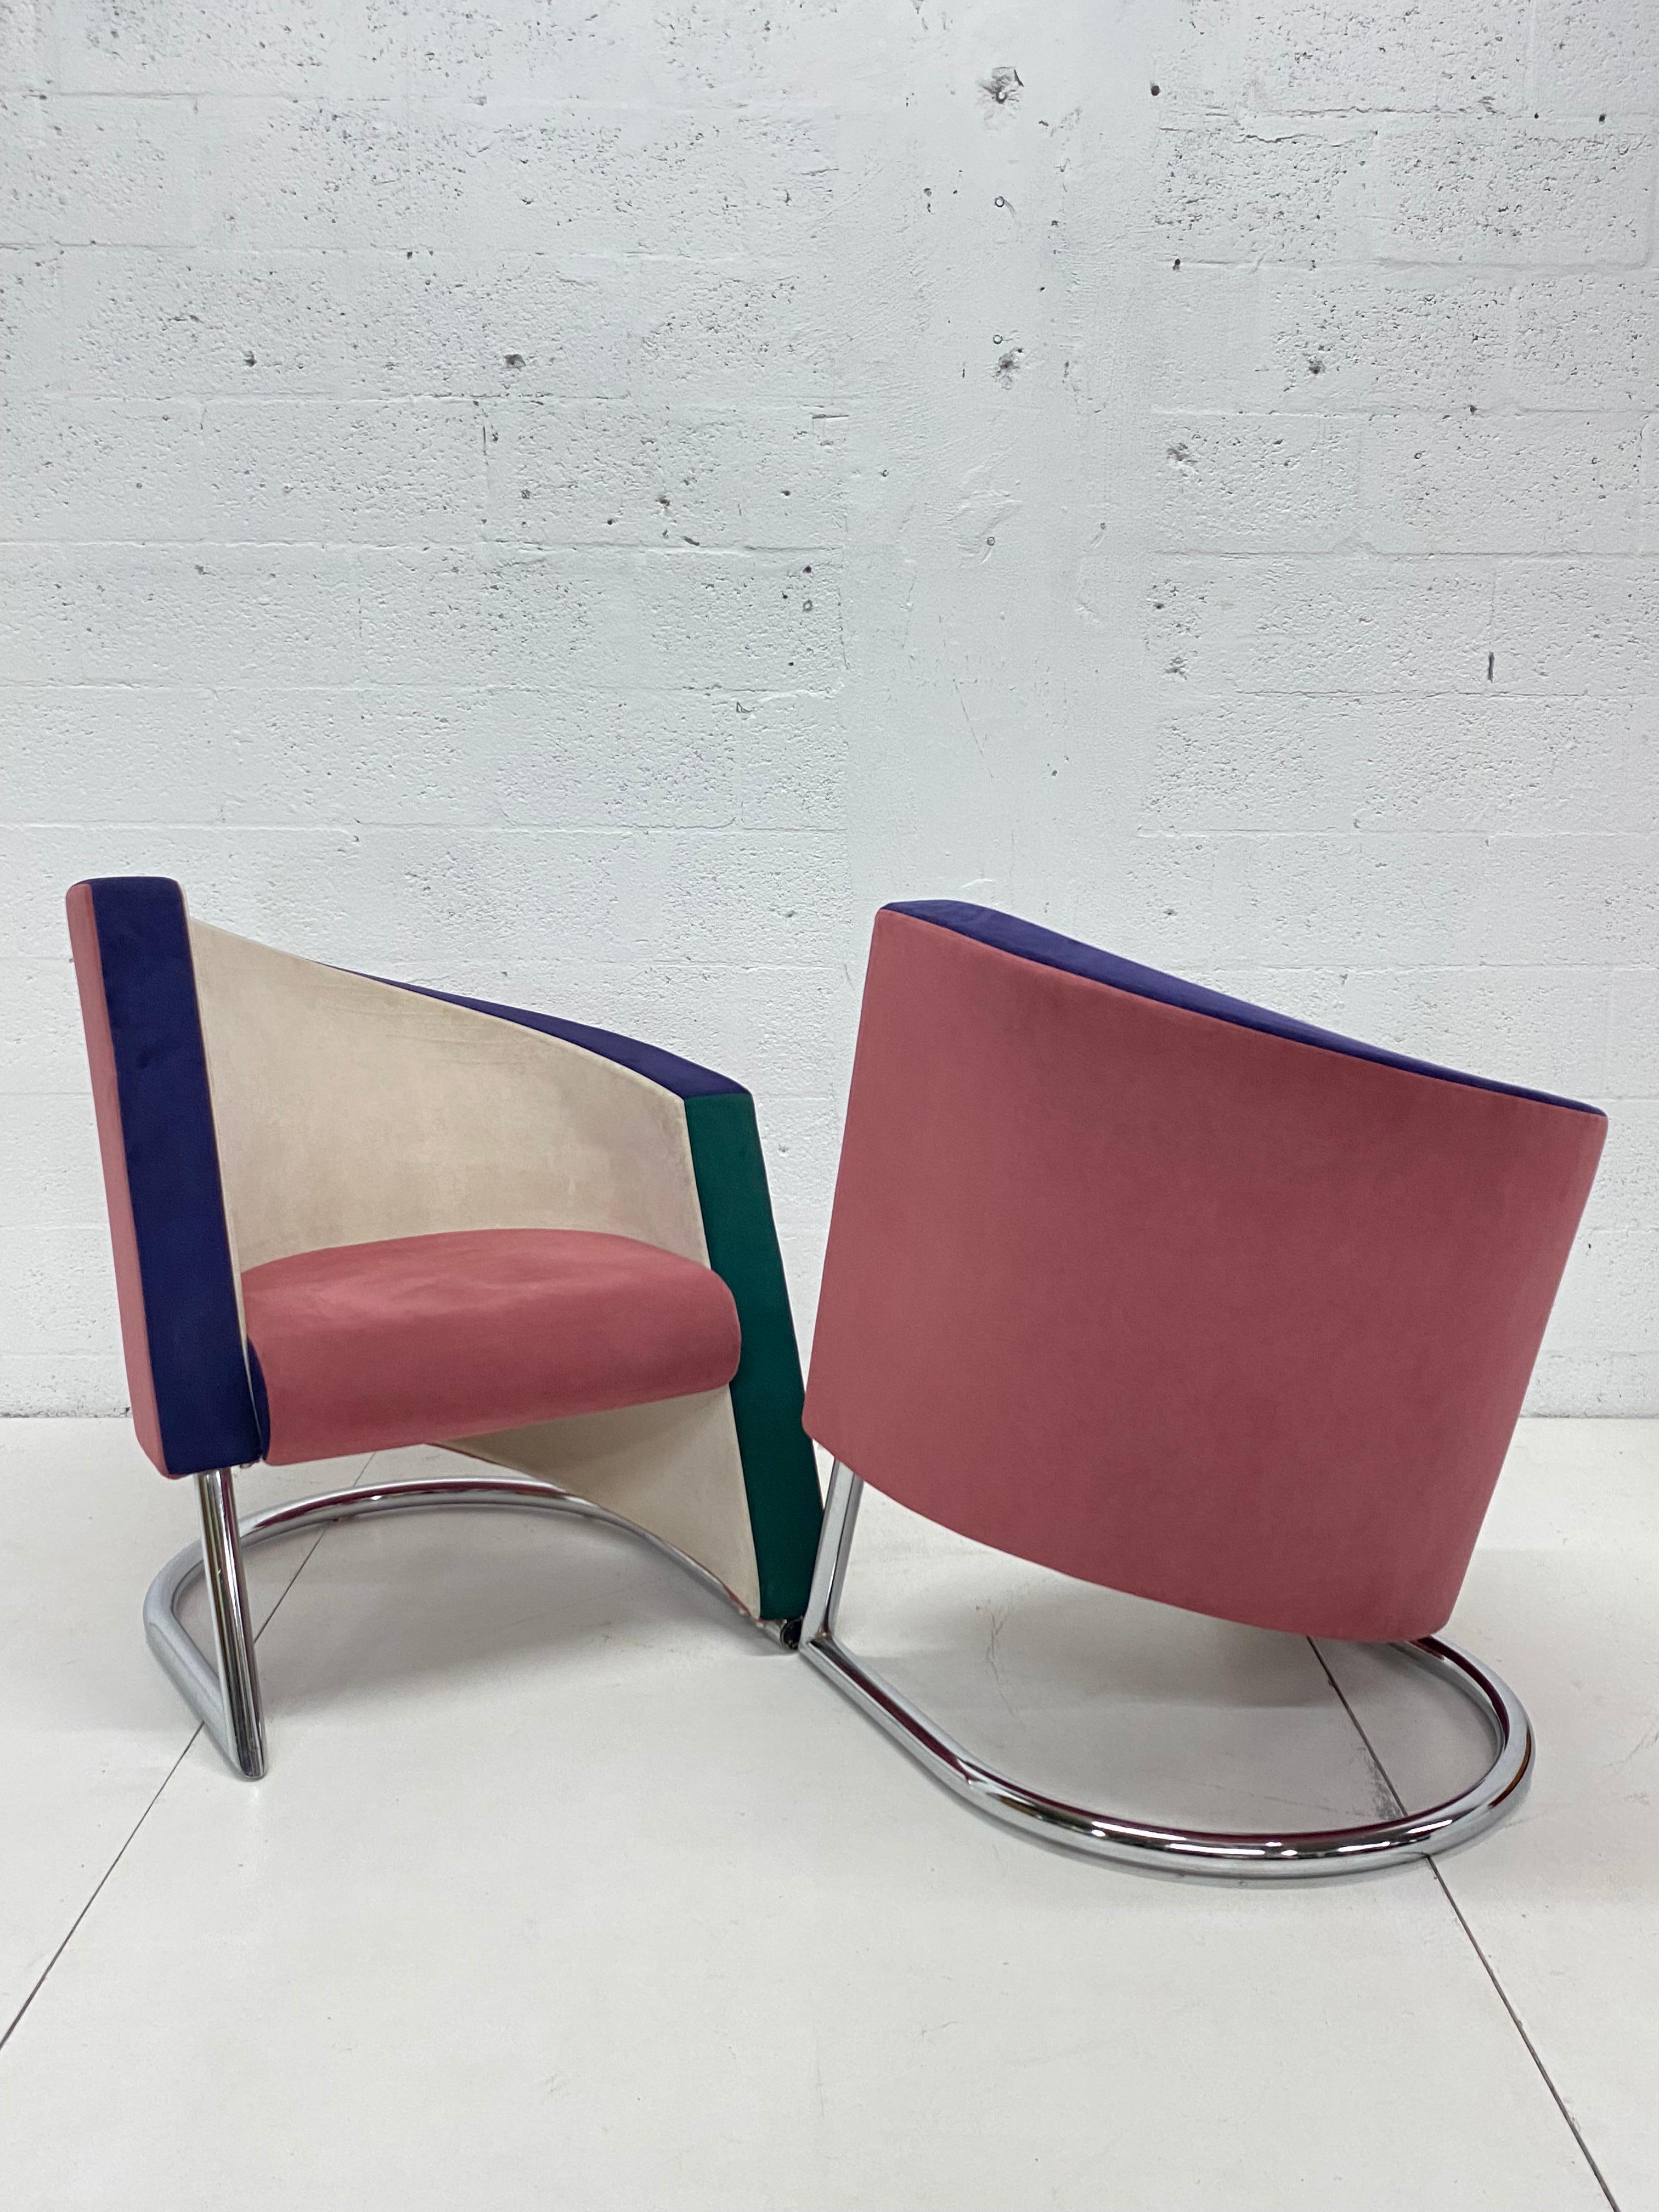 Late 20th Century Post Modern Opposing Club Chairs with Tubular Chrome Bases by Westnofa, a Pair